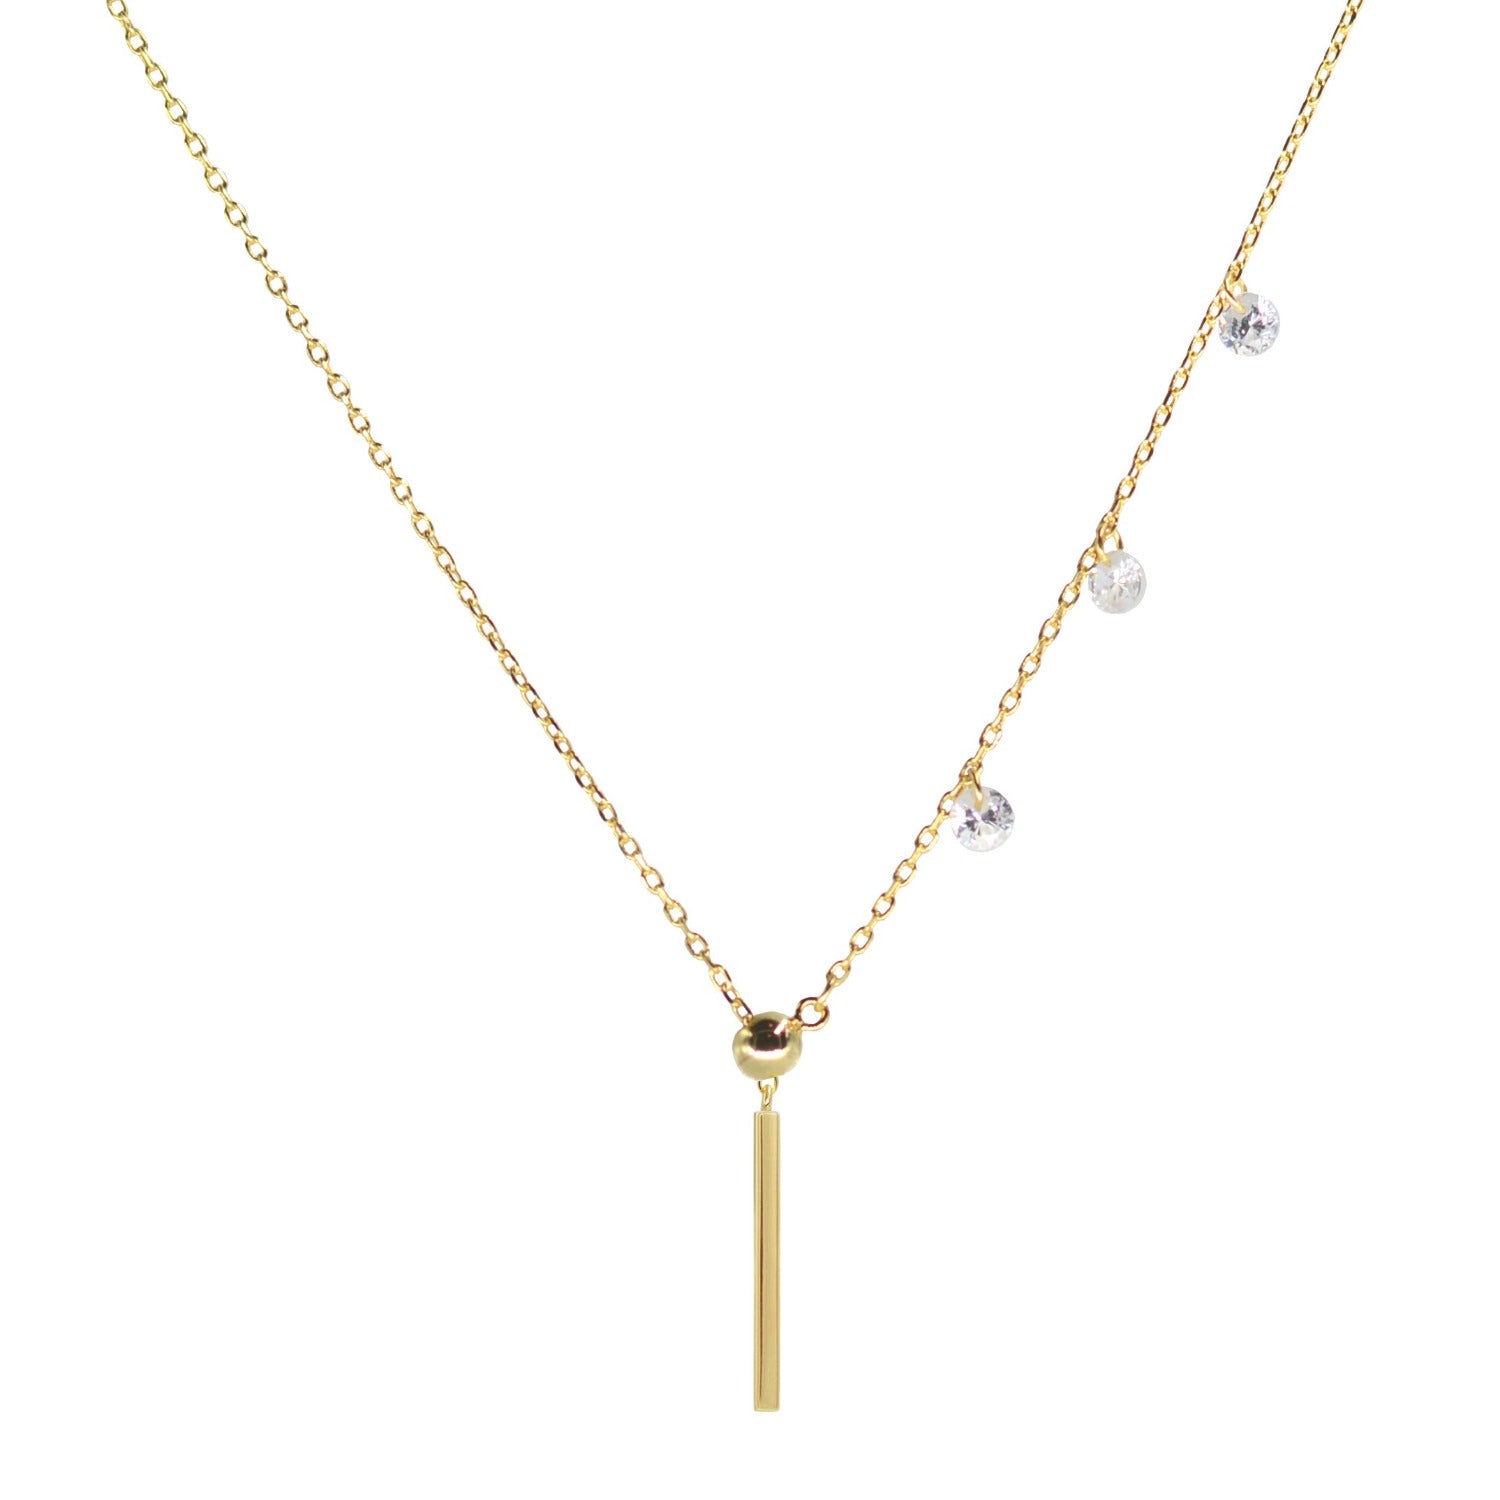 Double slider lariat necklace with mini bar in yellow gold